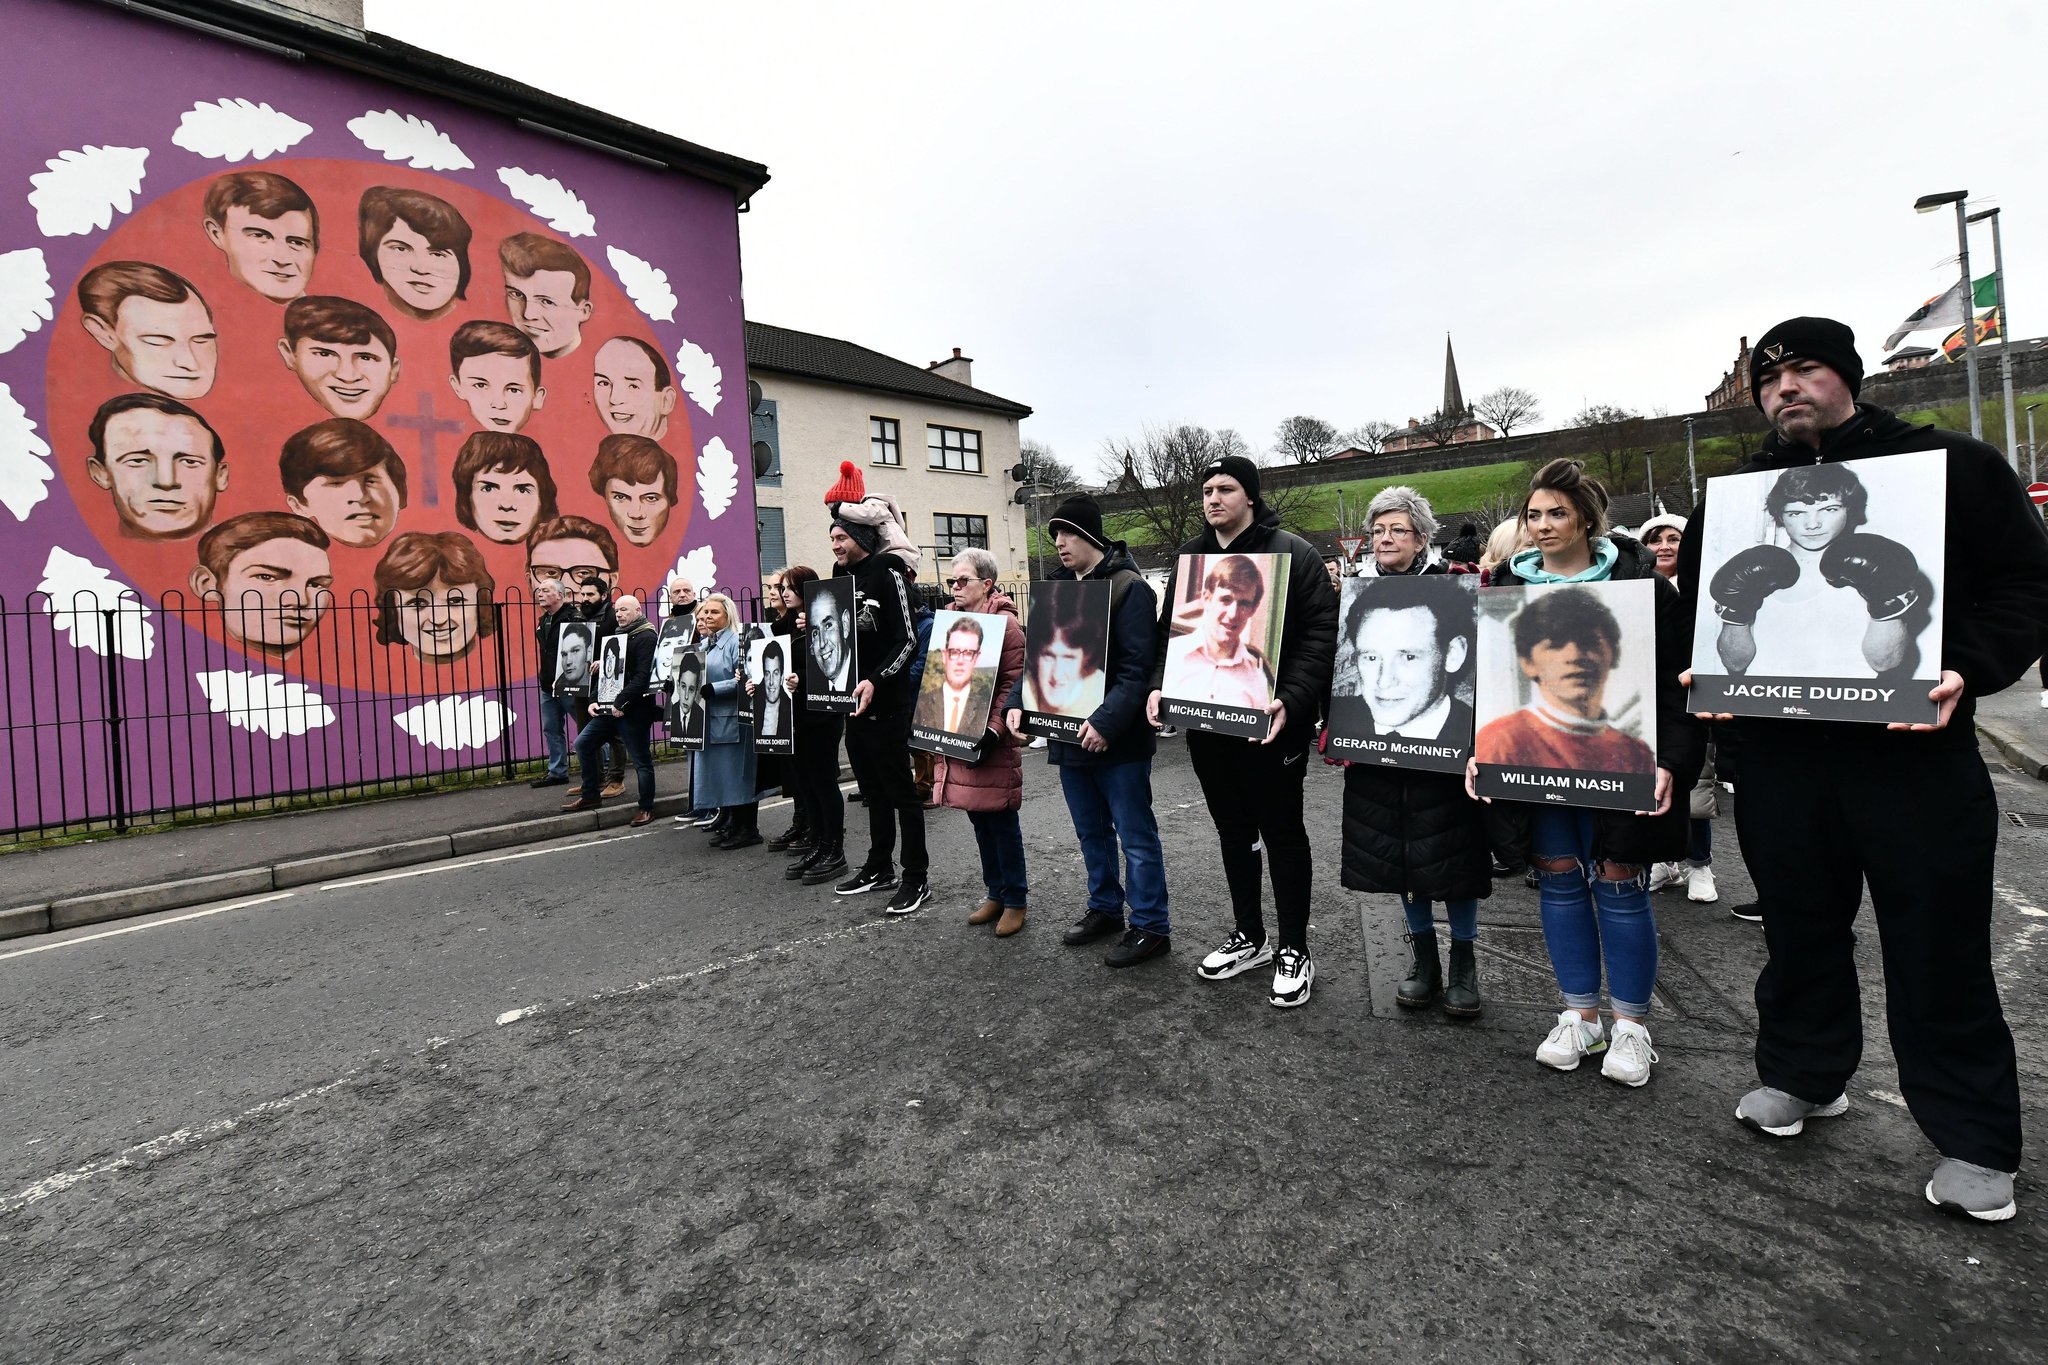 Unionists should join forces with Bloody Sunday families